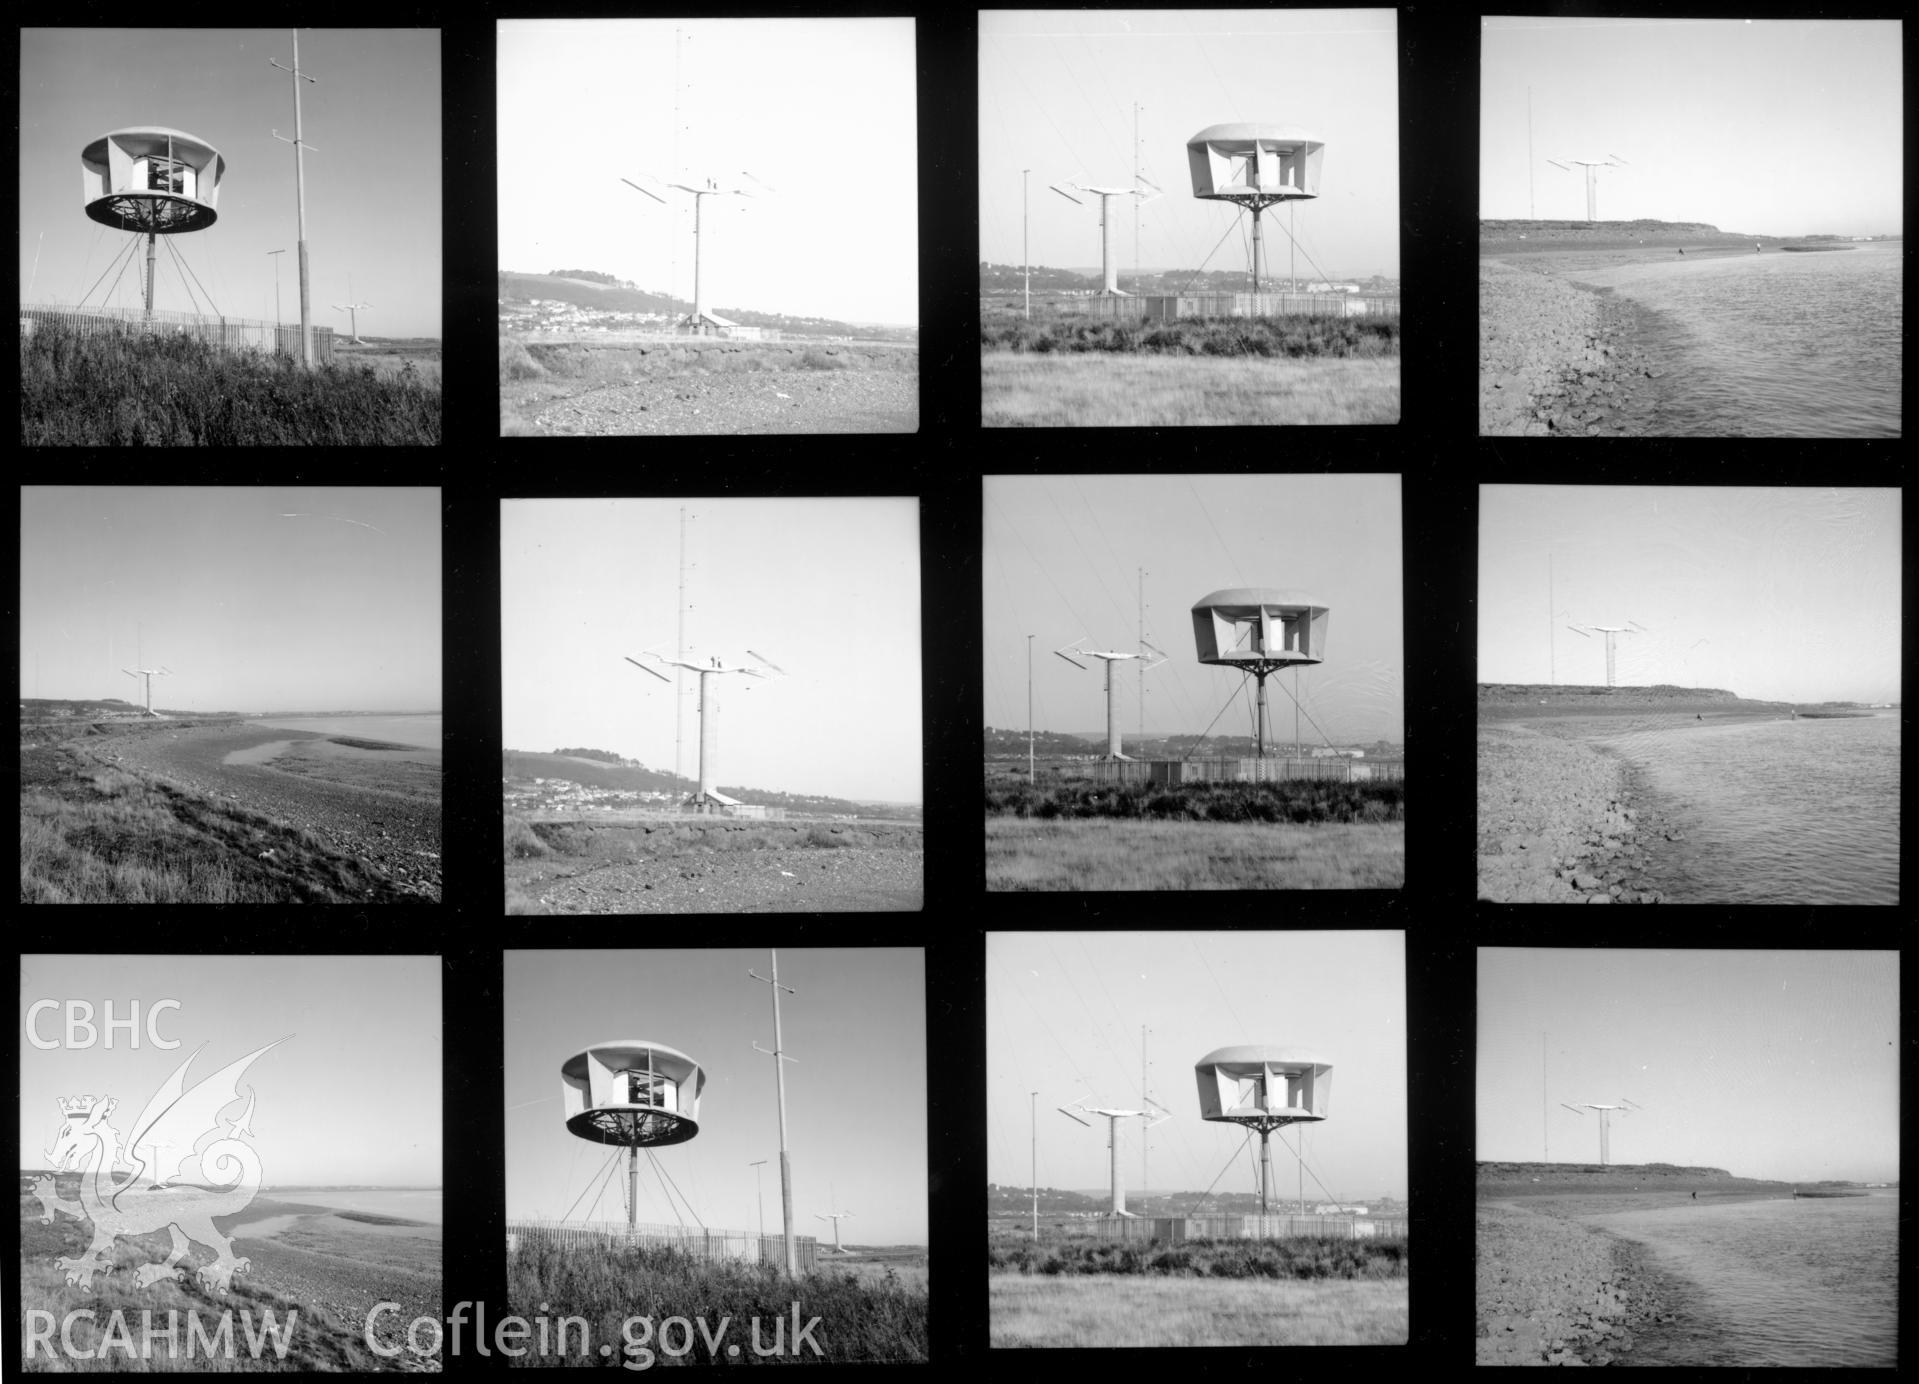 Contact sheet 2c of views of the prototype wind turbine at Carmarthen Bay in 1986. From the Central Office of Information Collection.